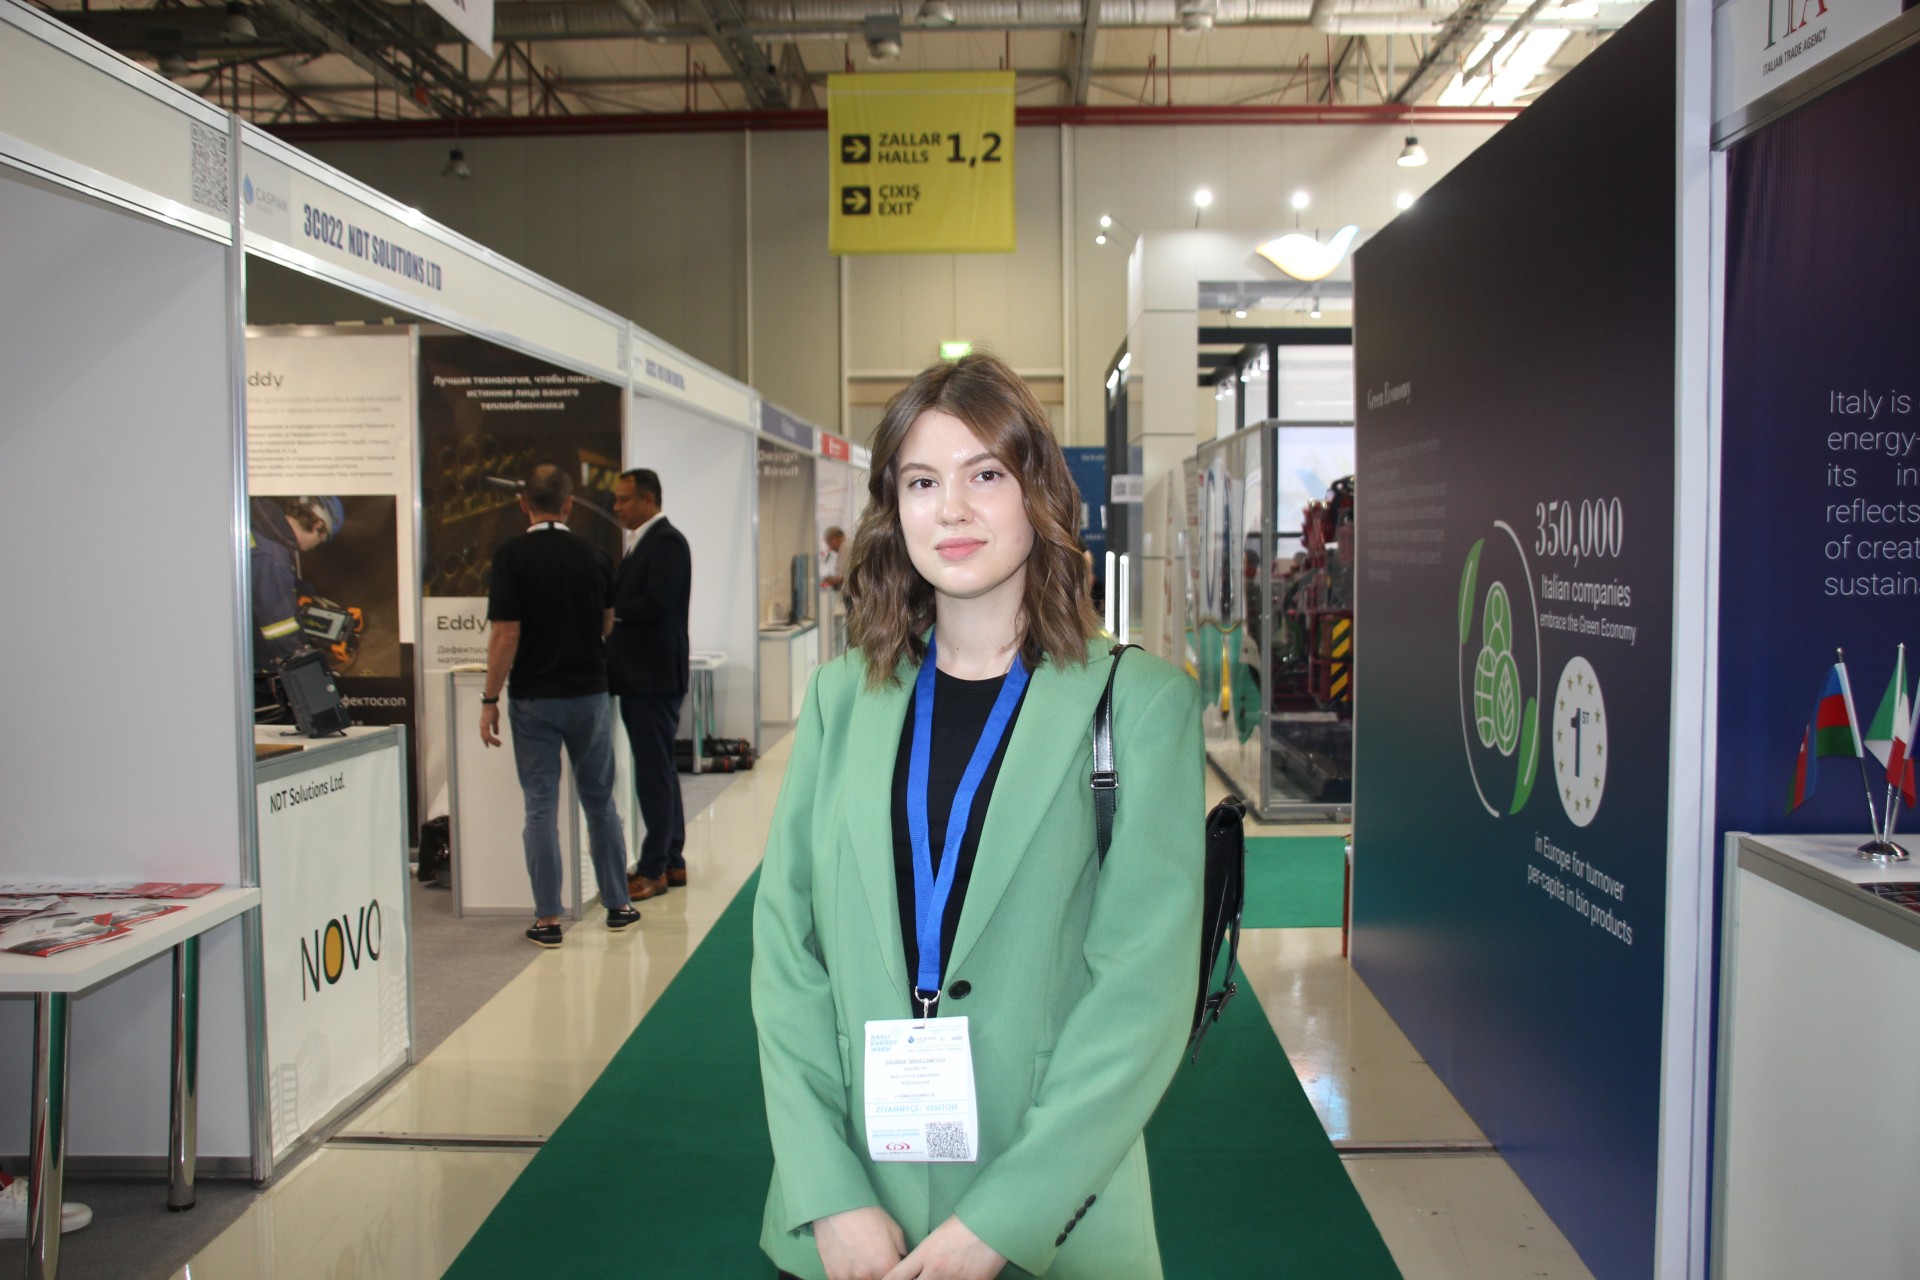 The highly beneficial business program of the exhibition